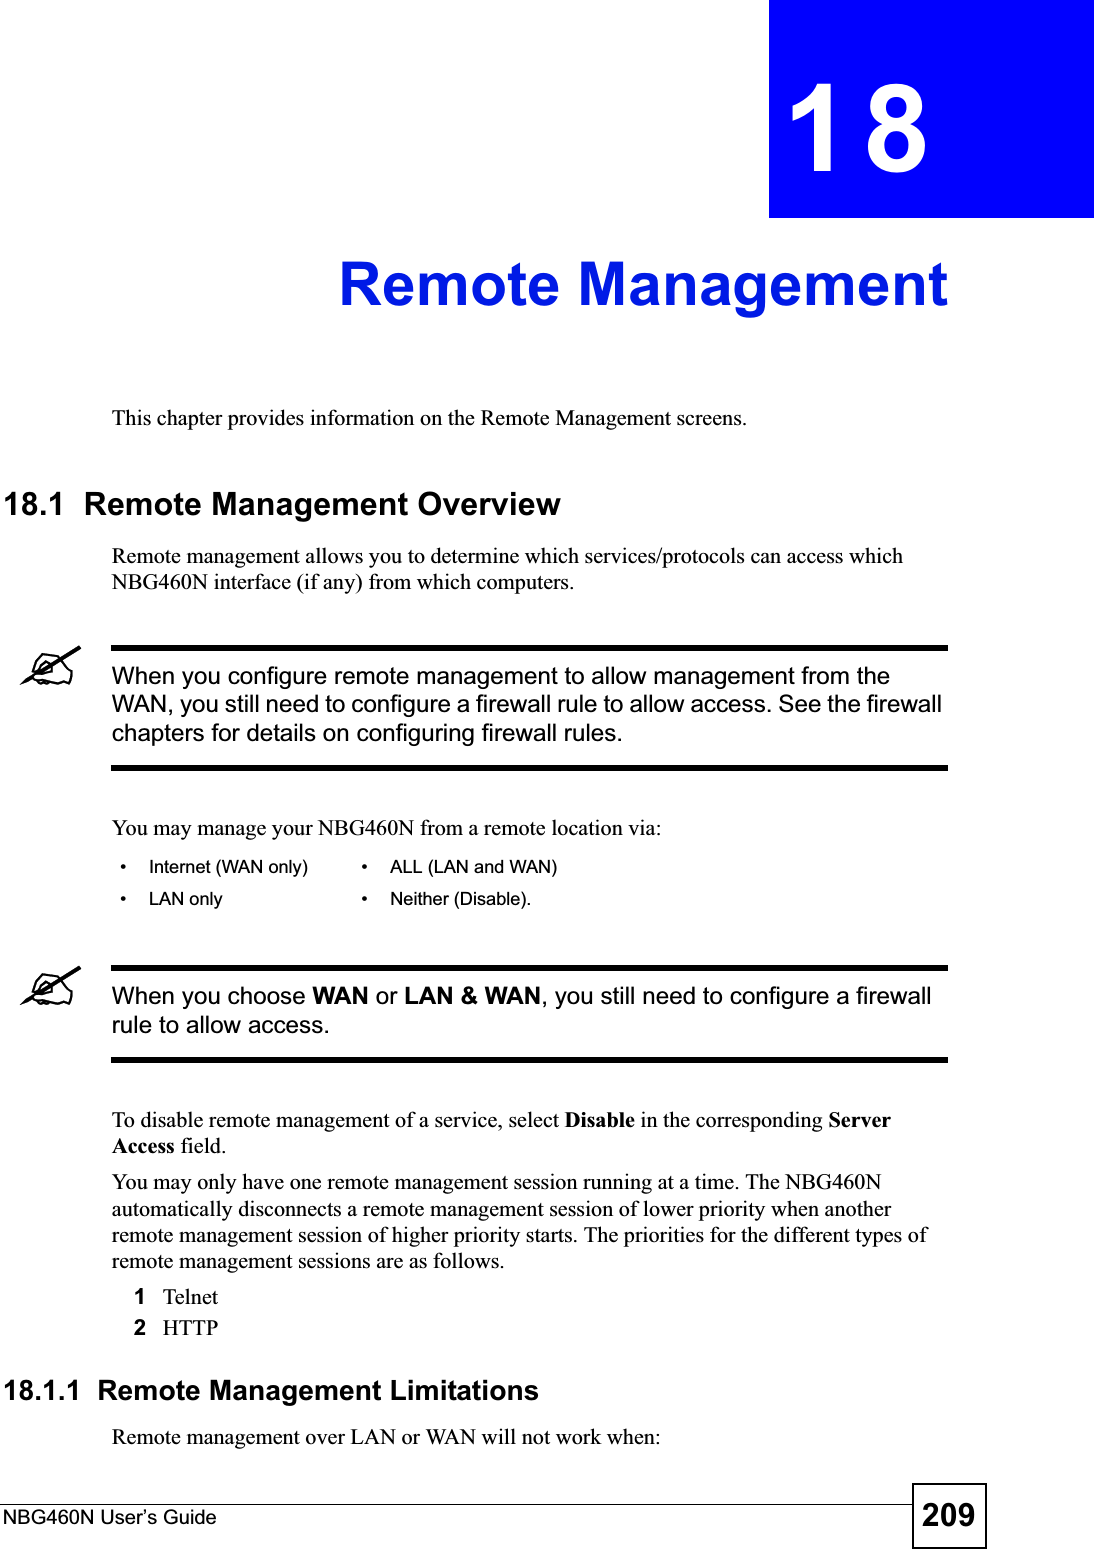 NBG460N User’s Guide 209CHAPTER 18Remote ManagementThis chapter provides information on the Remote Management screens. 18.1  Remote Management OverviewRemote management allows you to determine which services/protocols can access which NBG460N interface (if any) from which computers.&quot;When you configure remote management to allow management from the WAN, you still need to configure a firewall rule to allow access. See the firewall chapters for details on configuring firewall rules.You may manage your NBG460N from a remote location via:&quot;When you choose WAN or LAN &amp; WAN, you still need to configure a firewall rule to allow access.To disable remote management of a service, select Disable in the corresponding Server Access field.You may only have one remote management session running at a time. The NBG460N automatically disconnects a remote management session of lower priority when another remote management session of higher priority starts. The priorities for the different types of remote management sessions are as follows.1Telnet2HTTP18.1.1  Remote Management LimitationsRemote management over LAN or WAN will not work when:• Internet (WAN only) • ALL (LAN and WAN)• LAN only • Neither (Disable).